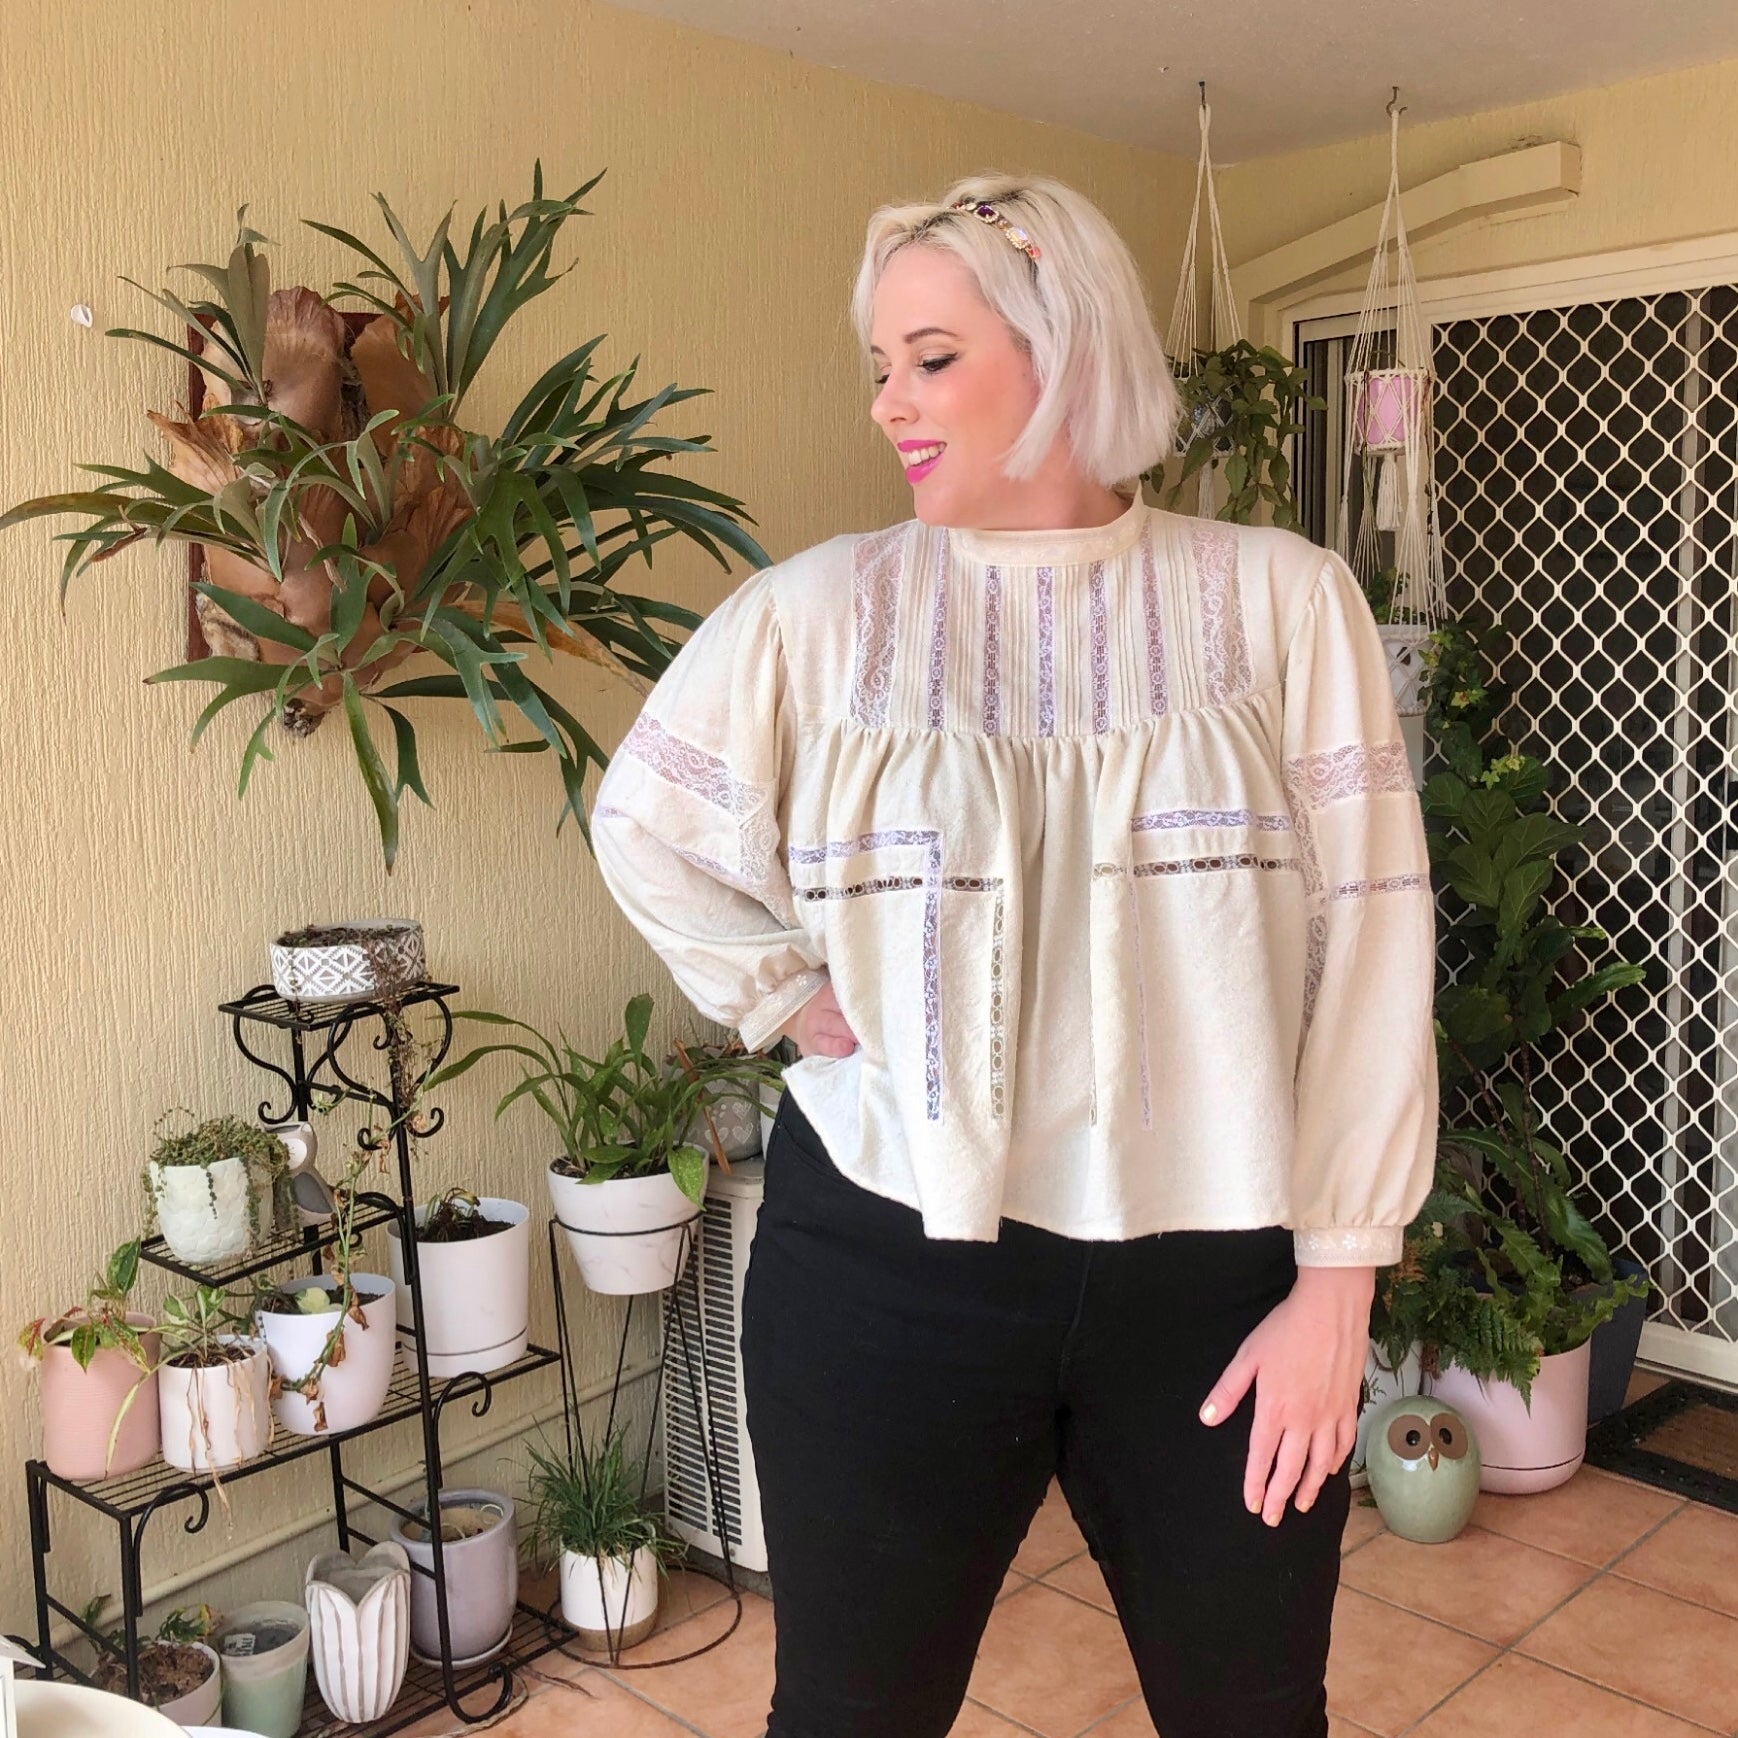 Shannon stands with one hand on her hip in front of her potted plants wearing her off white Silk Noil and lace long sleeved blouse with black jeans.  She is looking off to the side.